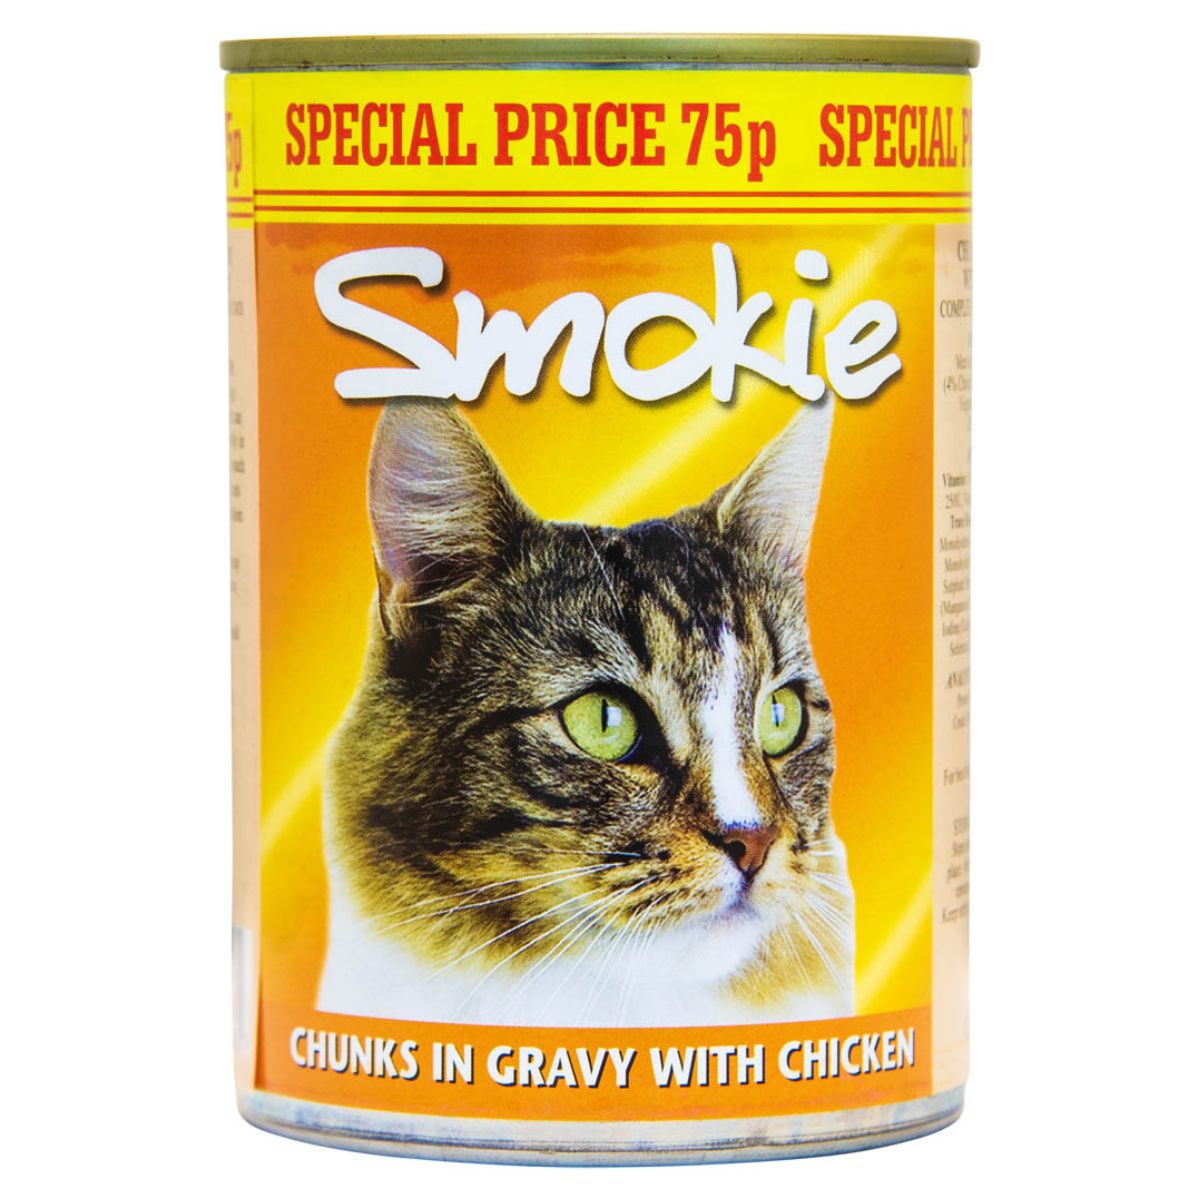 Smokie - Chunks in Gravy with Chicken - 400g cat food in a can.